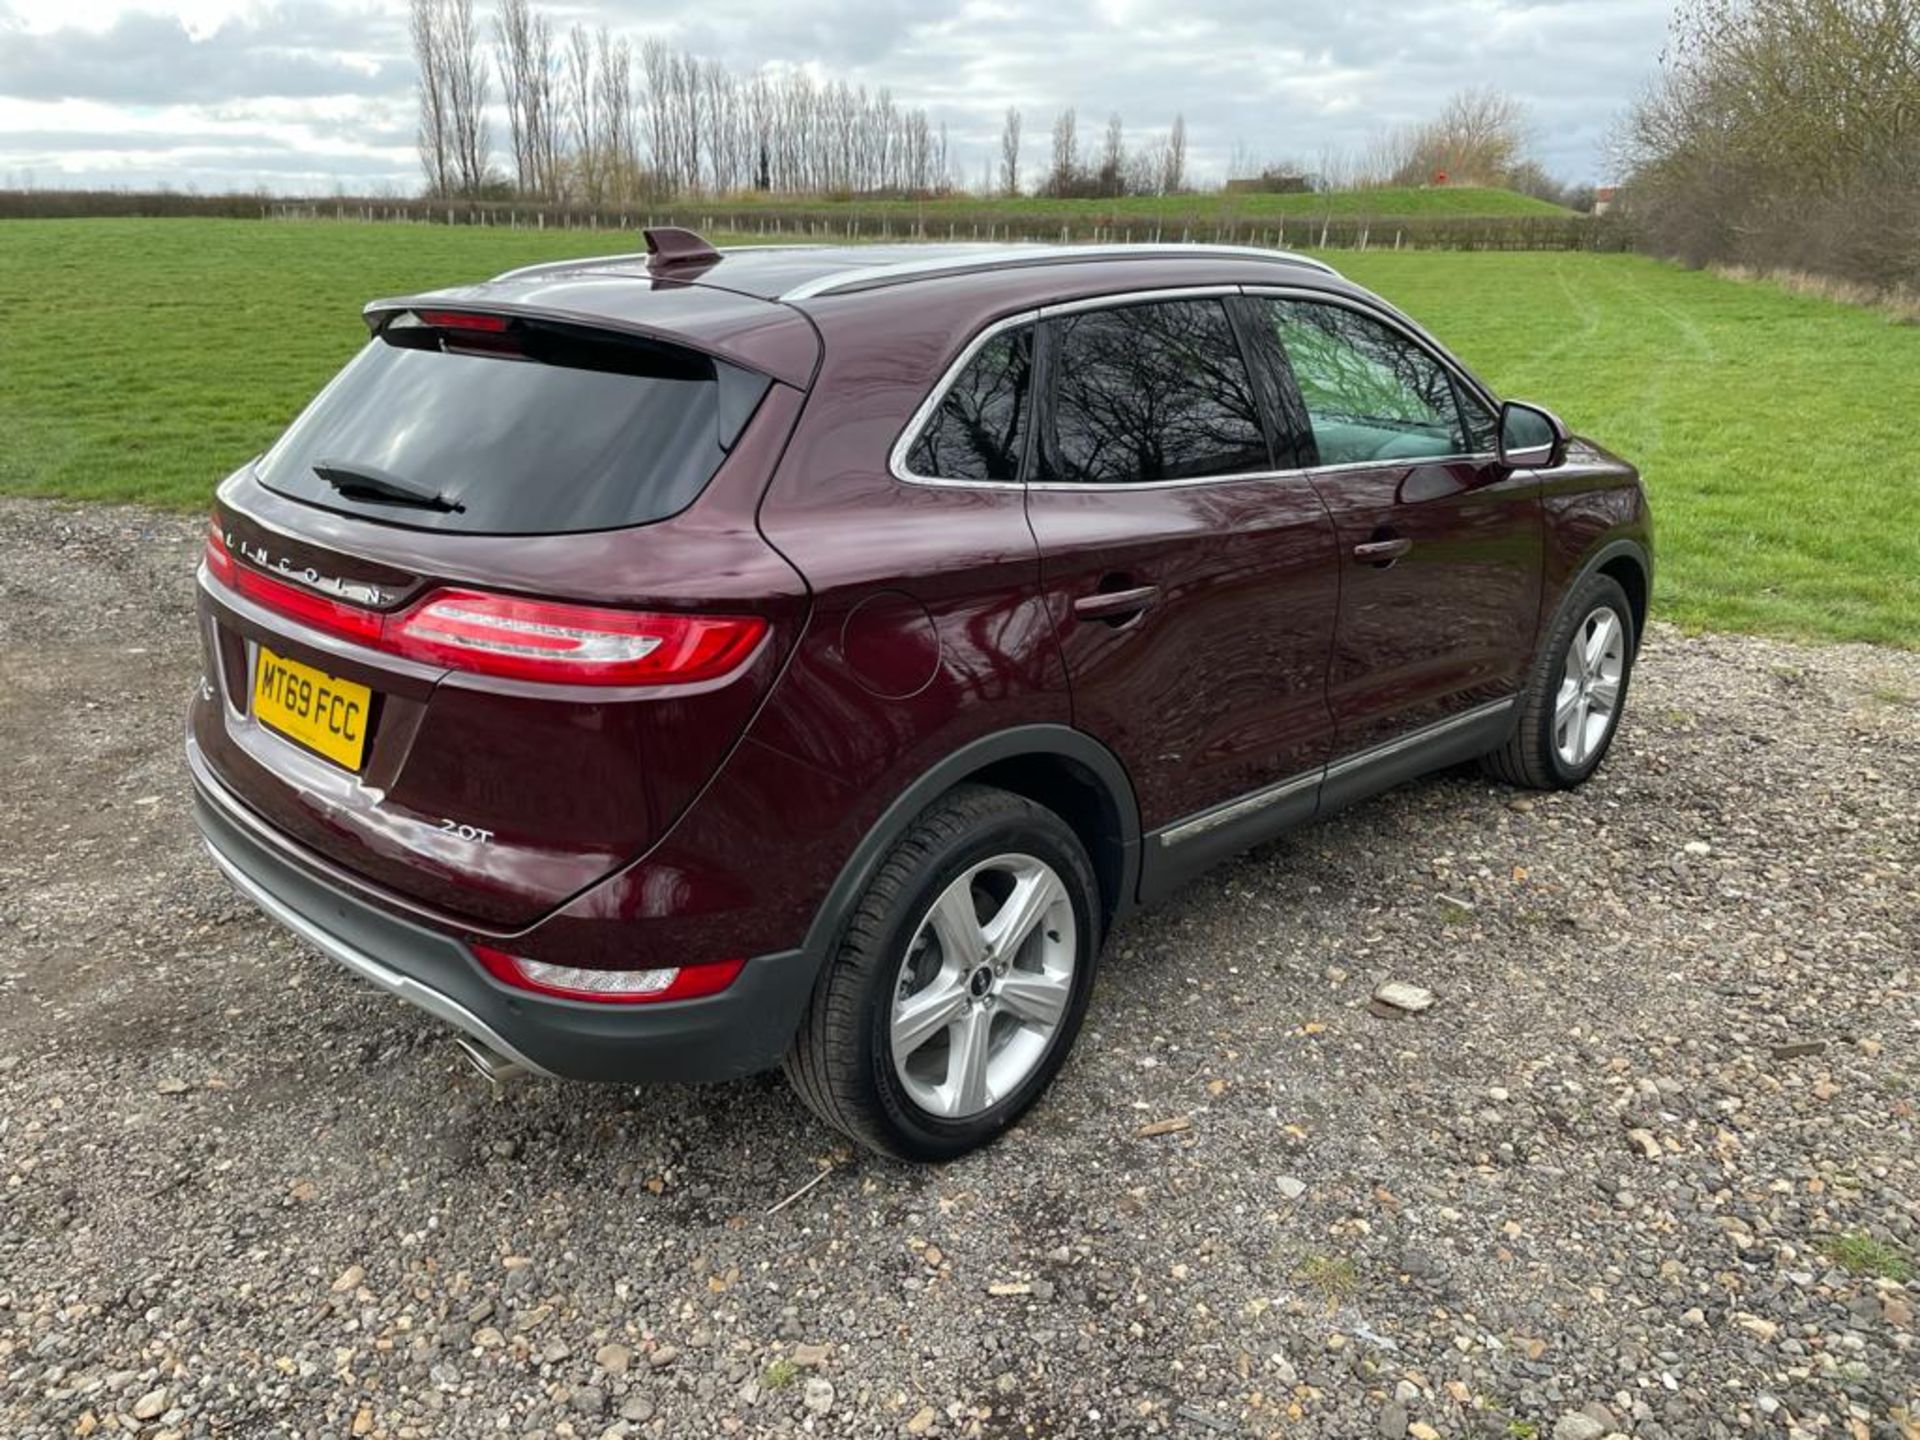 69 PLATE, PRE-REGISTERED 2017MY, LINCOLN MKC PREMIER 2.0L TURBO PETROL ECOBOOST (200bhp) AUTOMATIC - Image 7 of 14